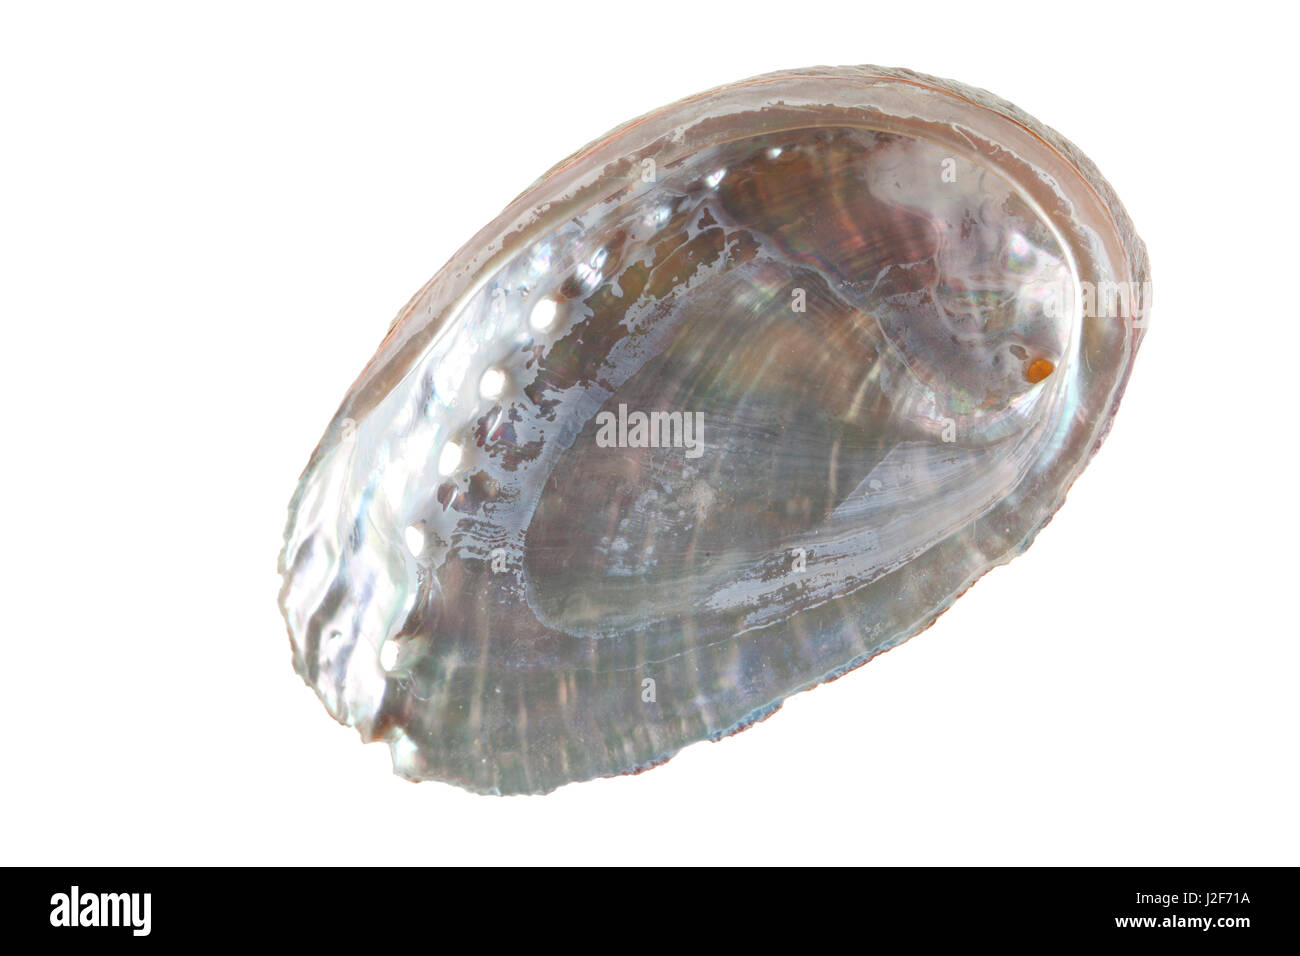 abalone shell isolated against a white background Stock Photo